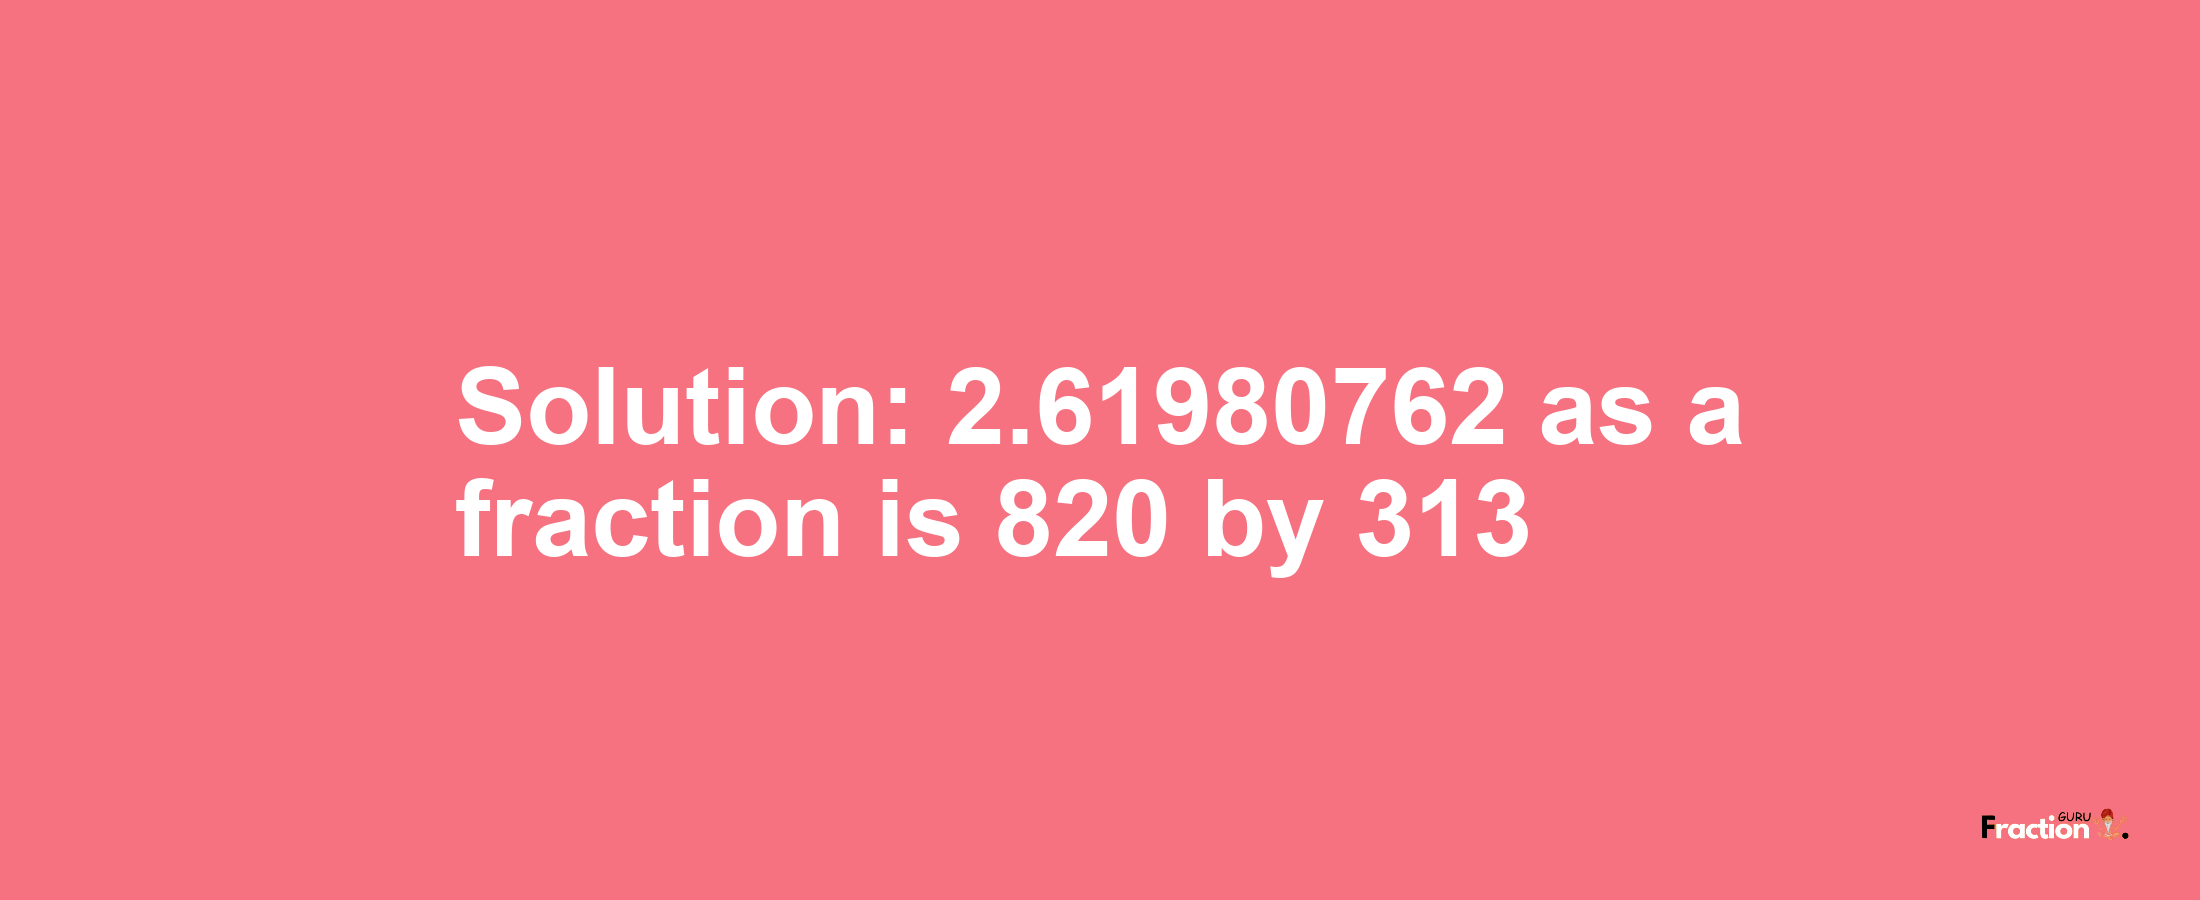 Solution:2.61980762 as a fraction is 820/313